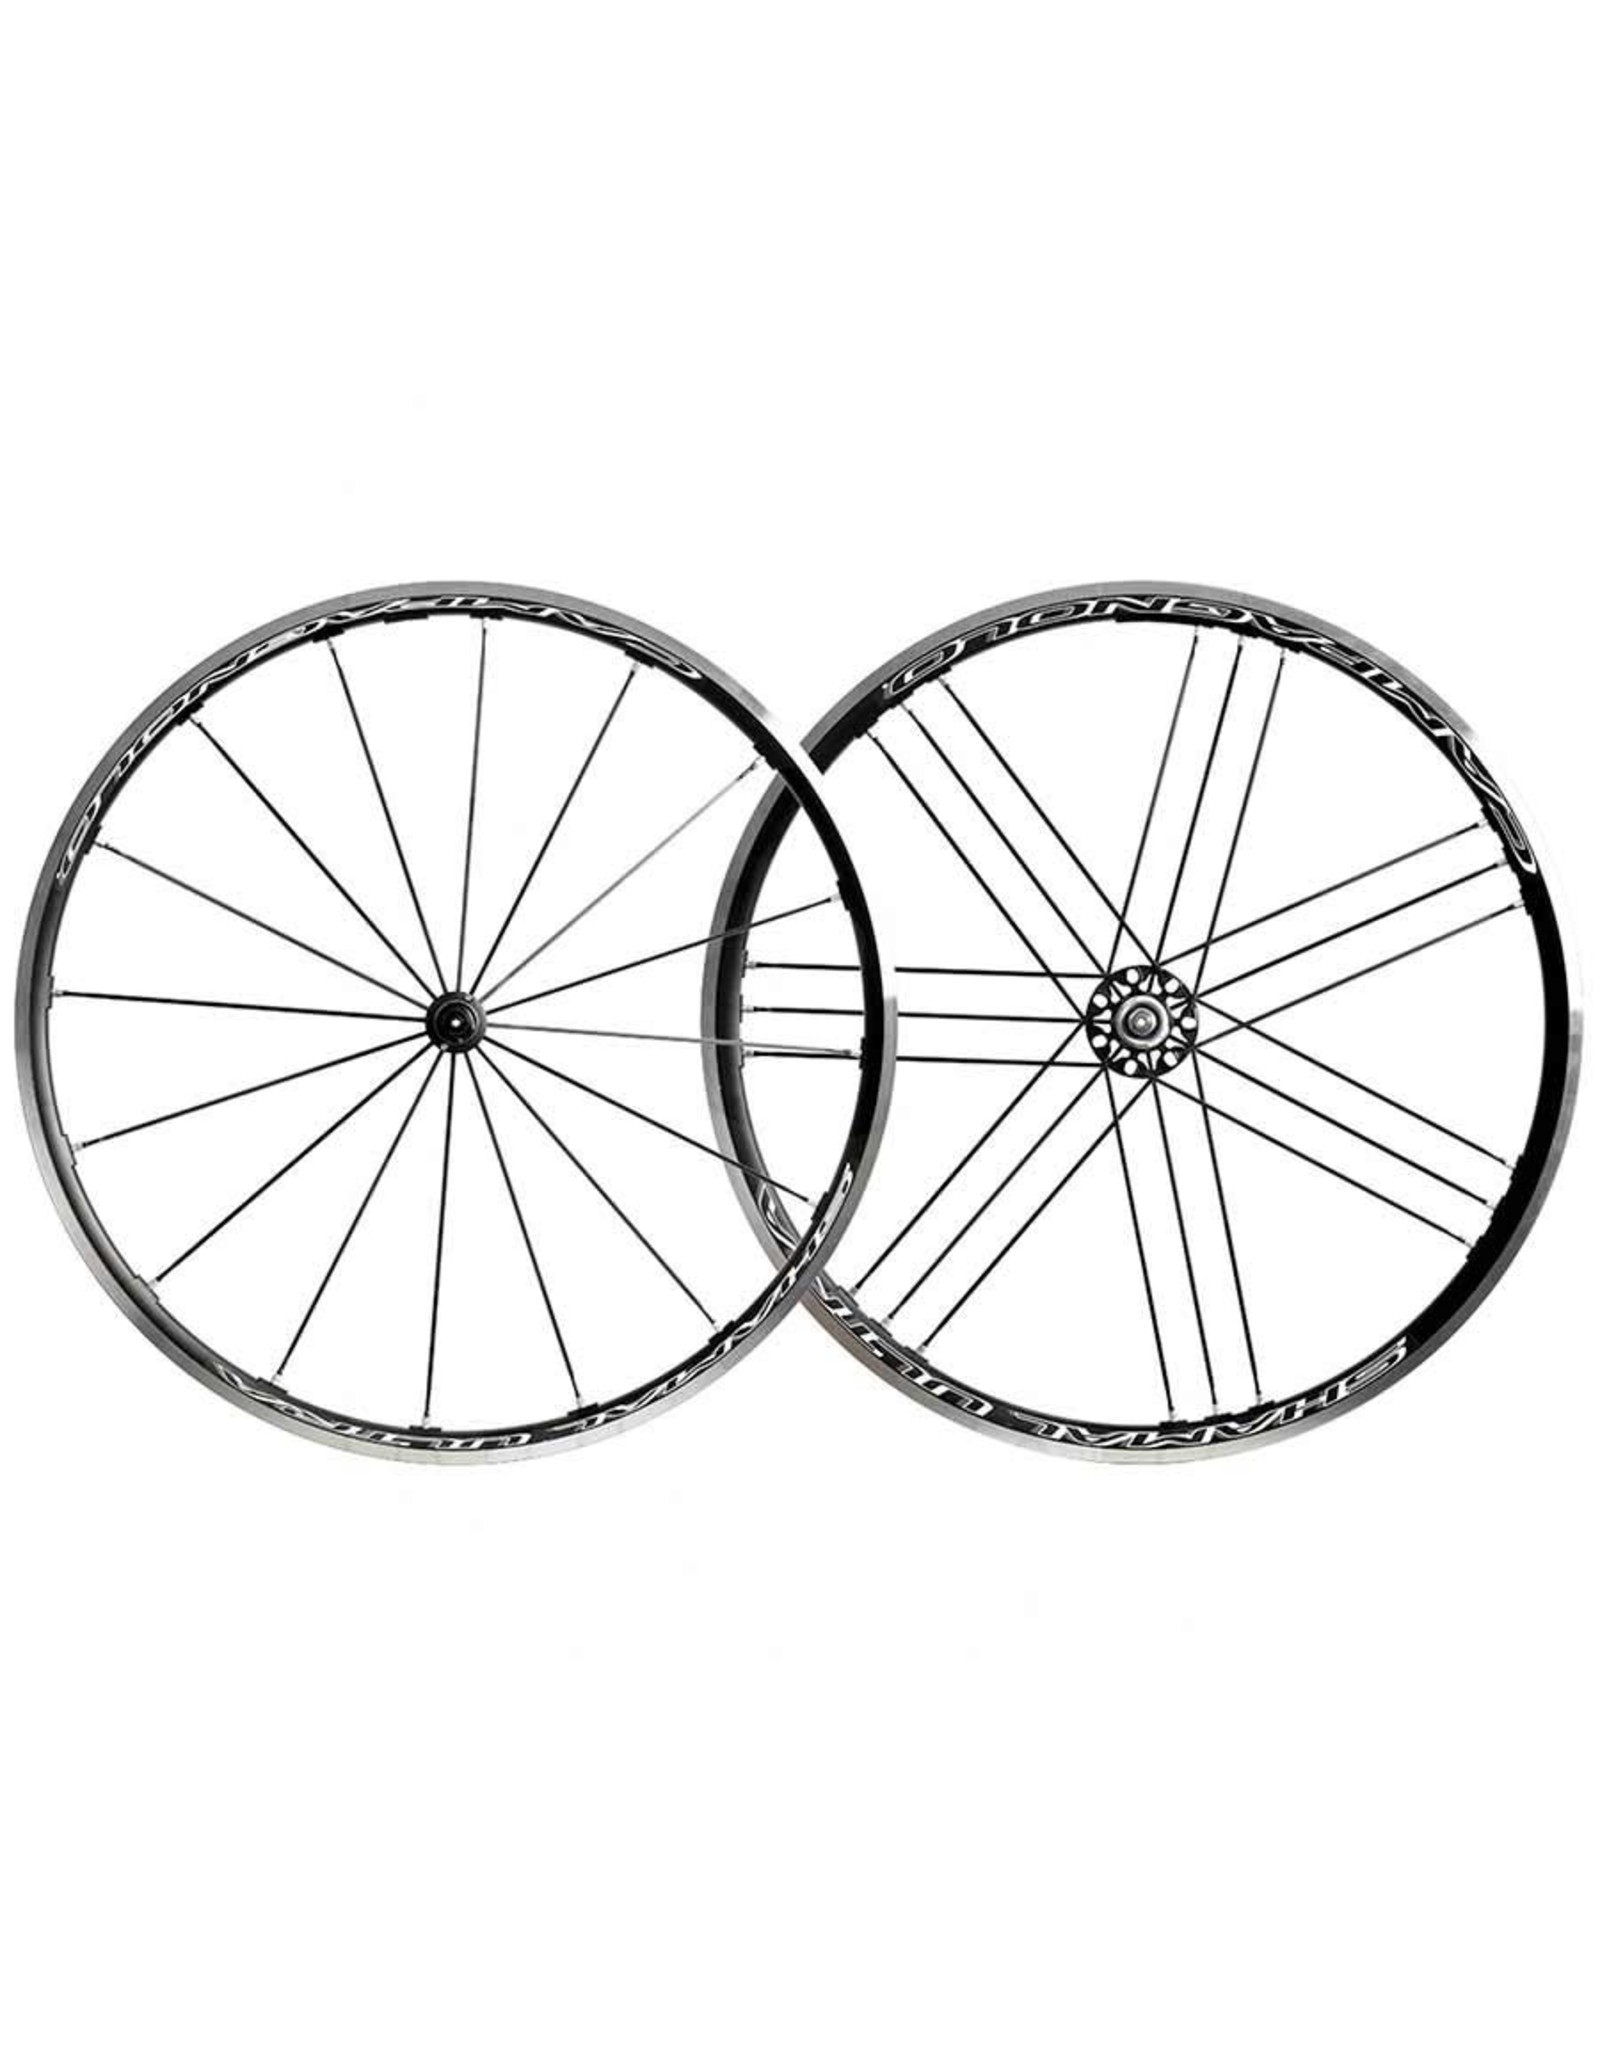 Campagnolo Wheelset Campagnolo Shamal Ultra C17 700c Clincher QR